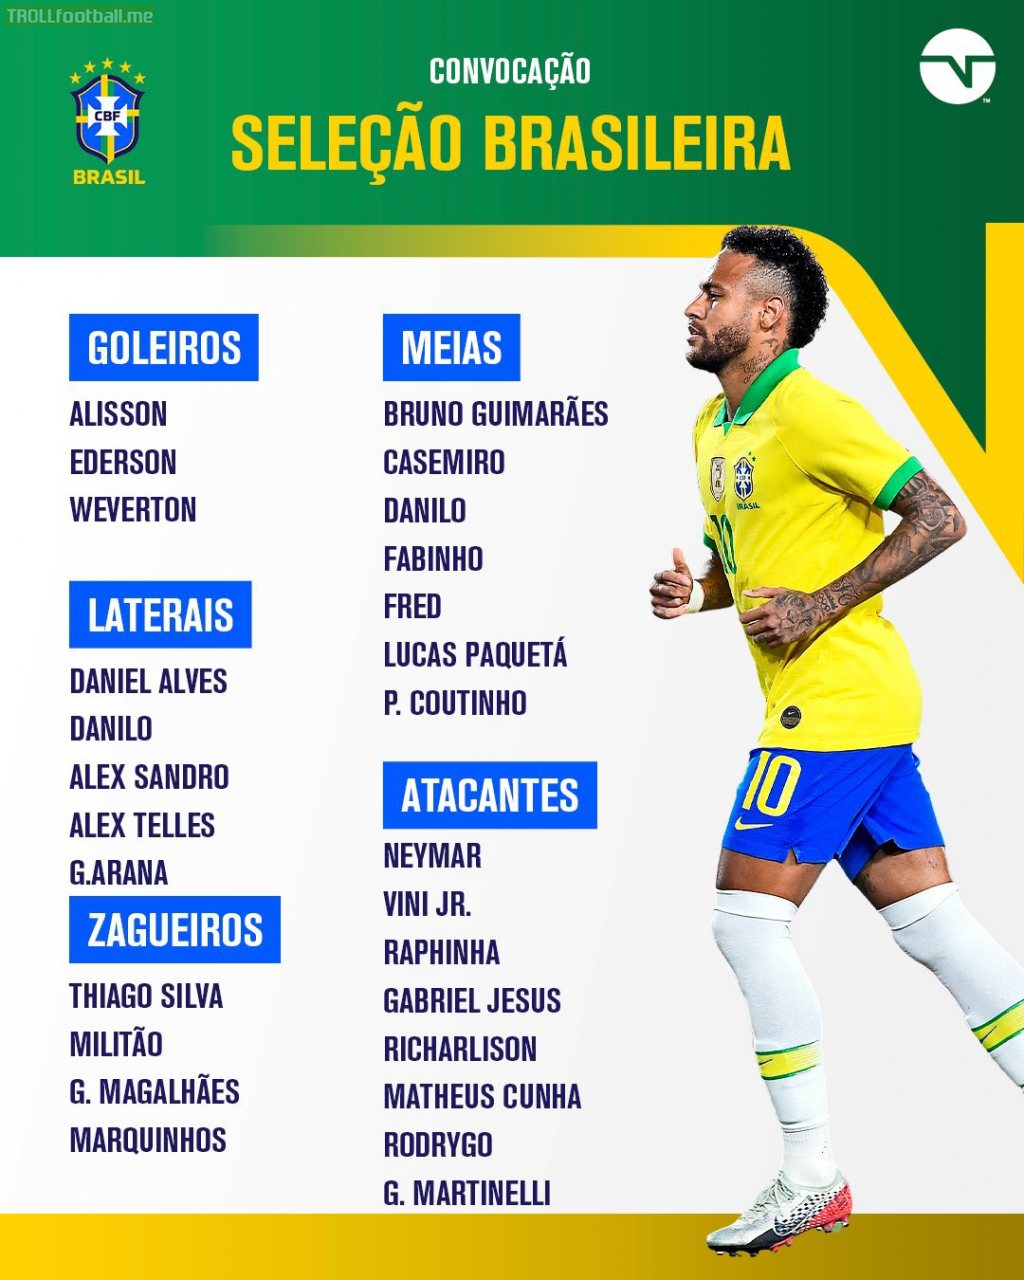 Players called up to the Brazilian national team for the games against South Korea and Japan